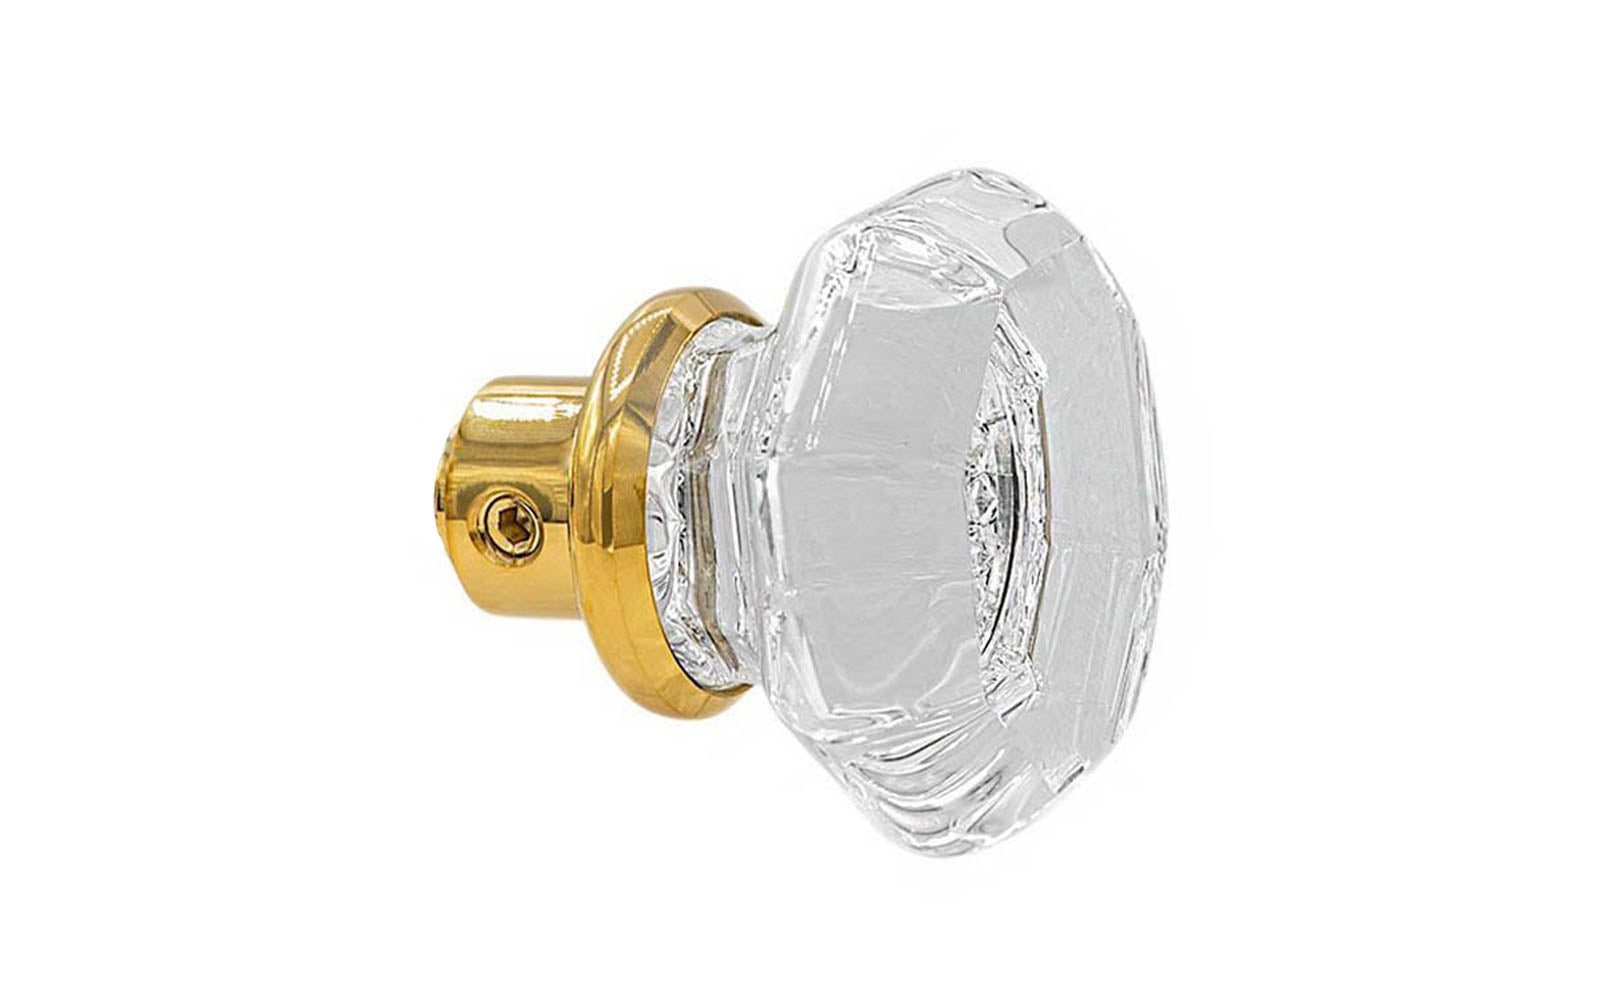 Single Classic Octagonal Clear Glass Doorknob. A high quality & genuine glass doorknob with an attractive Octagon design. The sparkling center point under glass amplifies reflected light to showcase beautiful facets. Solid brass base. Reproduction Glass Door Knobs. Traditional Octagonal Glass Knobs. One knob. Lacquered Brass Finish.